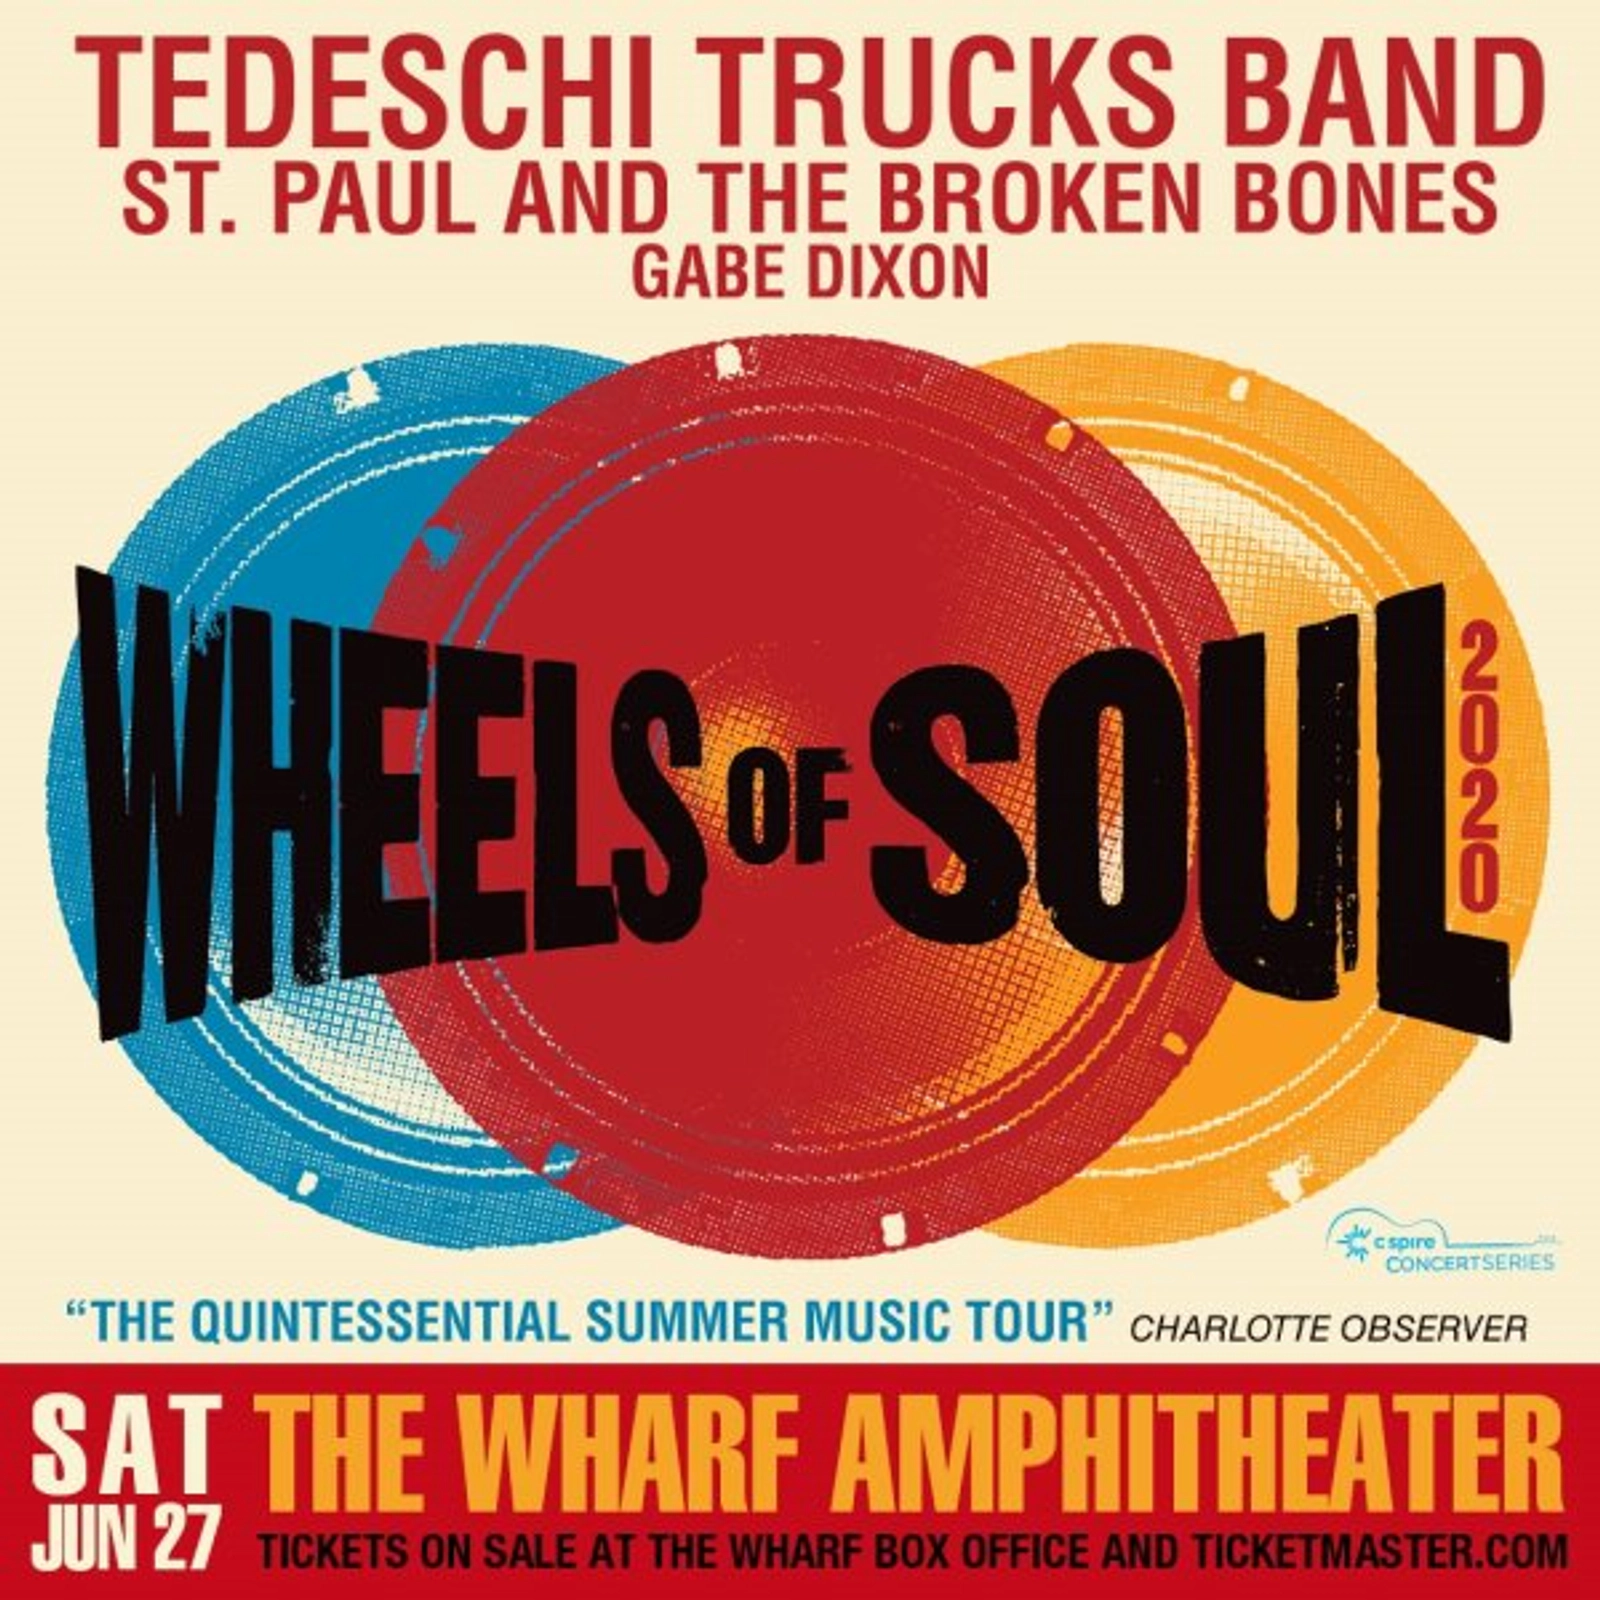 The Wheels of Soul Tour is coming back to the Wharf! Win your tickets now! - Thumbnail Image